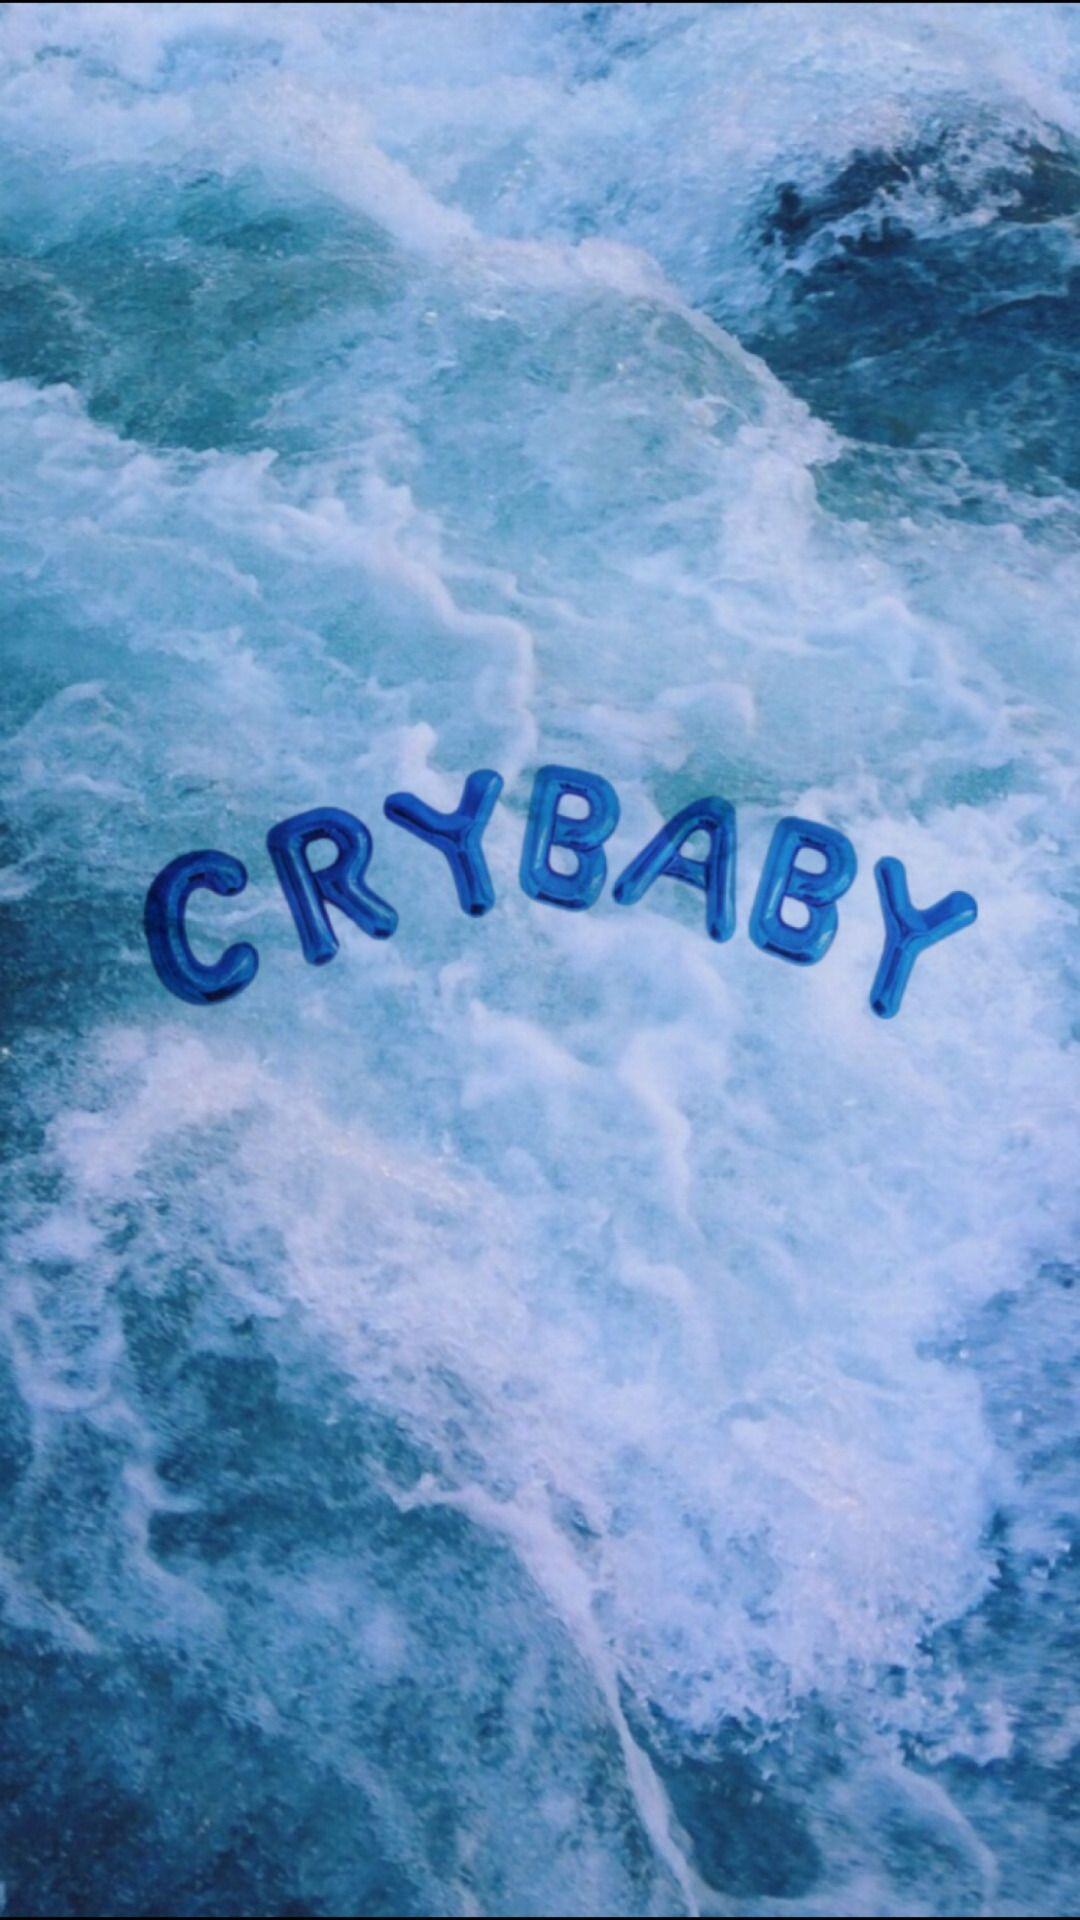 Cry Baby Aesthetic Wallpaper Free Cry Baby Aesthetic Background